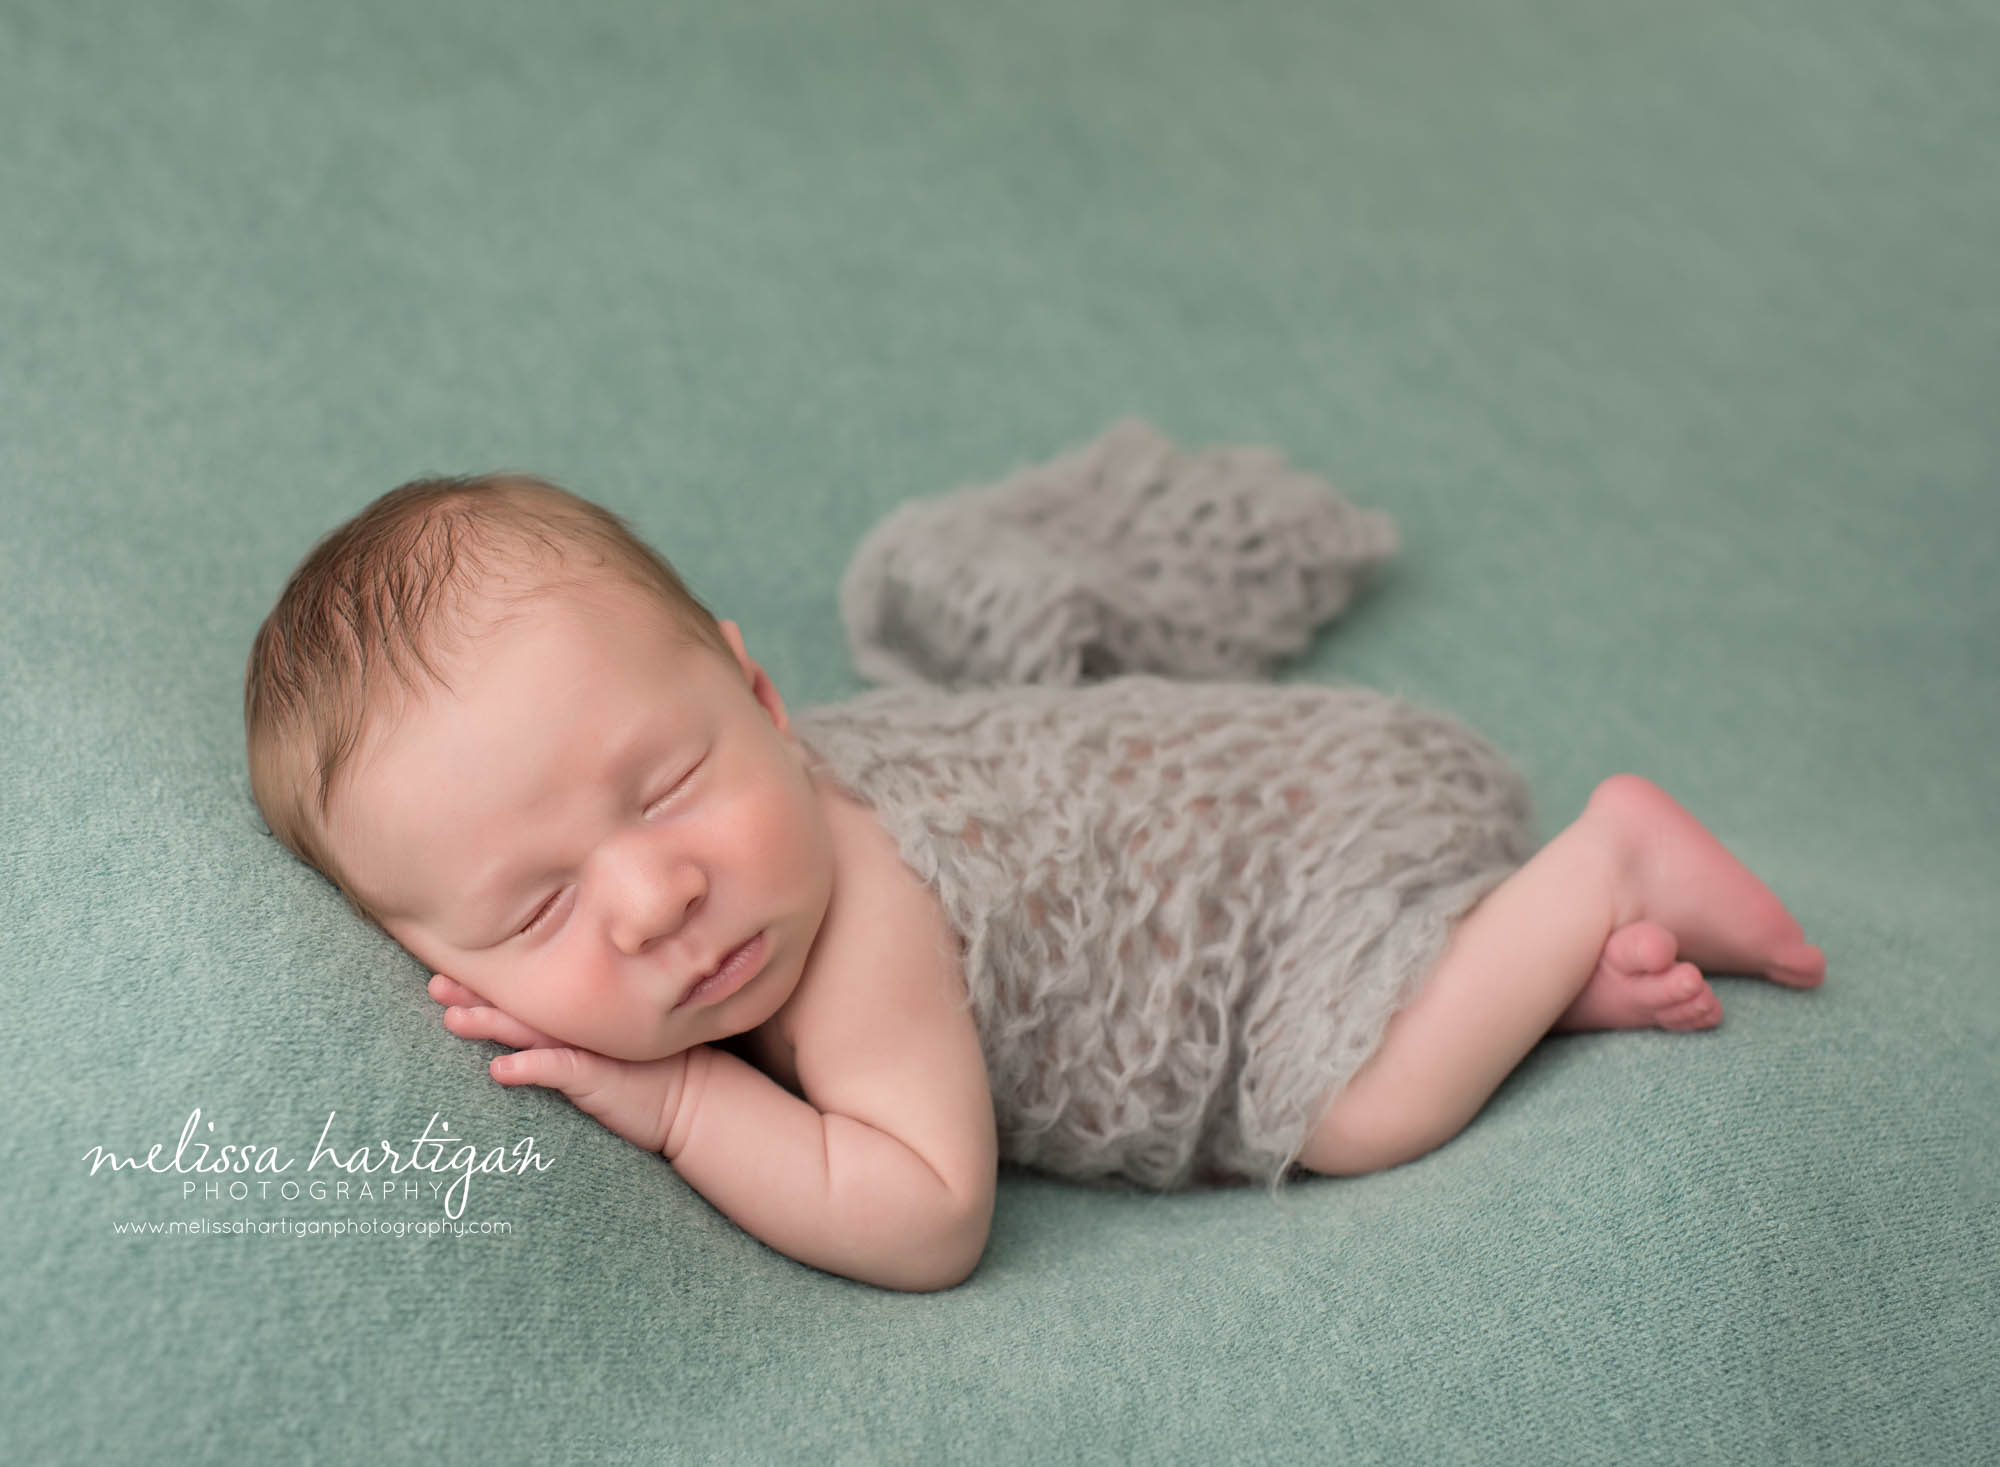 newborn baby boy posed on teal backdrop with light teal gray knitted layer CT newborn photography